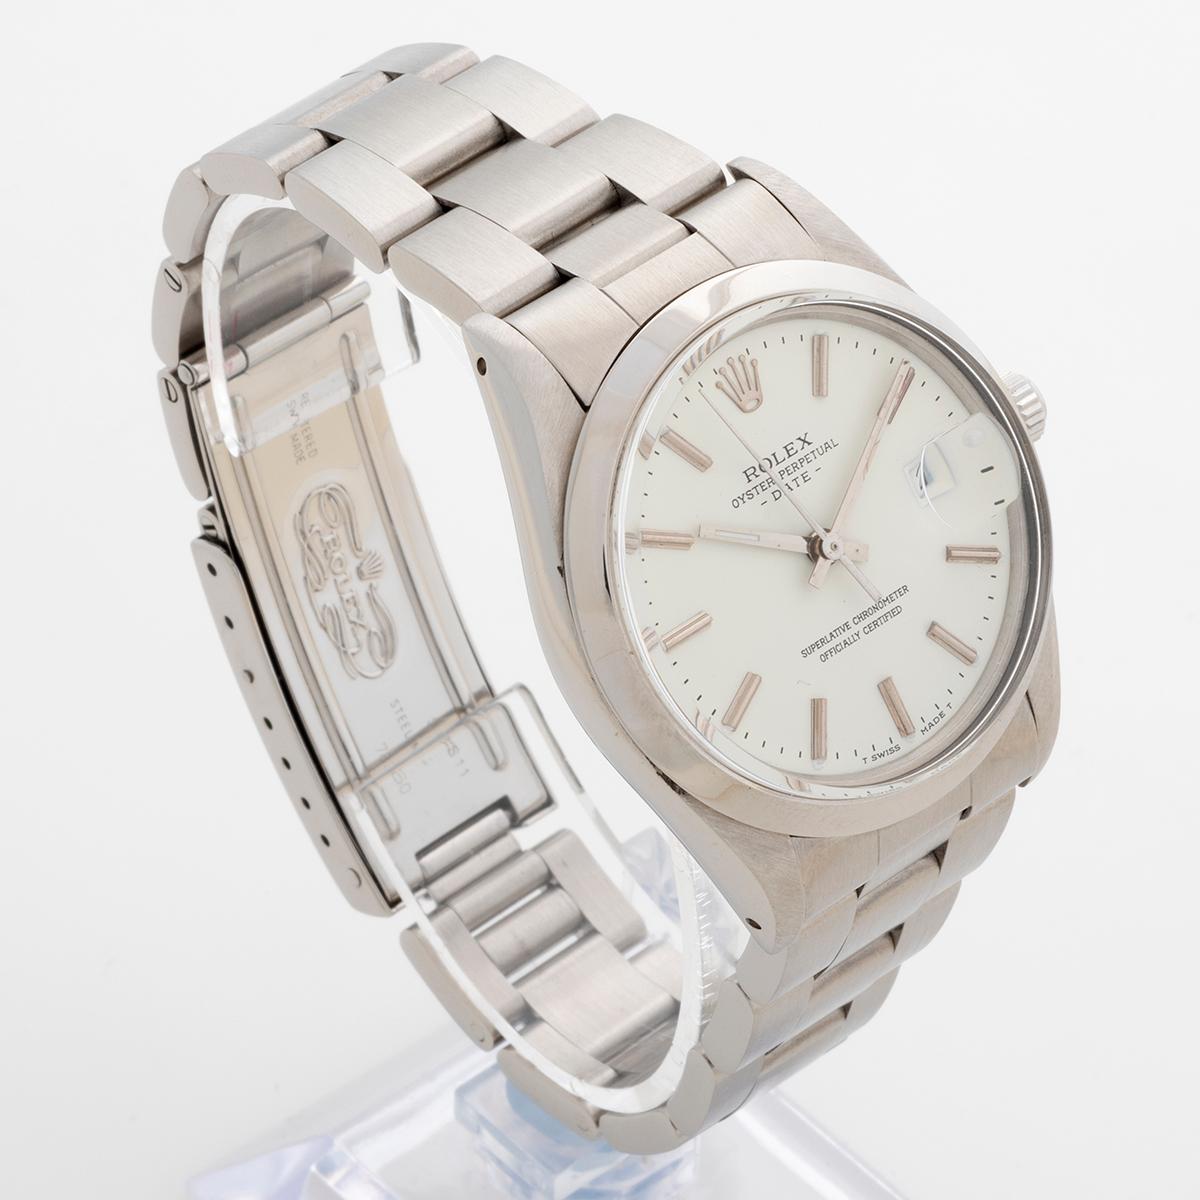 Our vintage Rolex Date features a stainless steel 34mm case with stainless steel Oyster bracelet. Notably, this reference 15000 has a lovely crisp white baton dial. We date production to c.1982 as it bears a 78 **** serial. The overall condition of